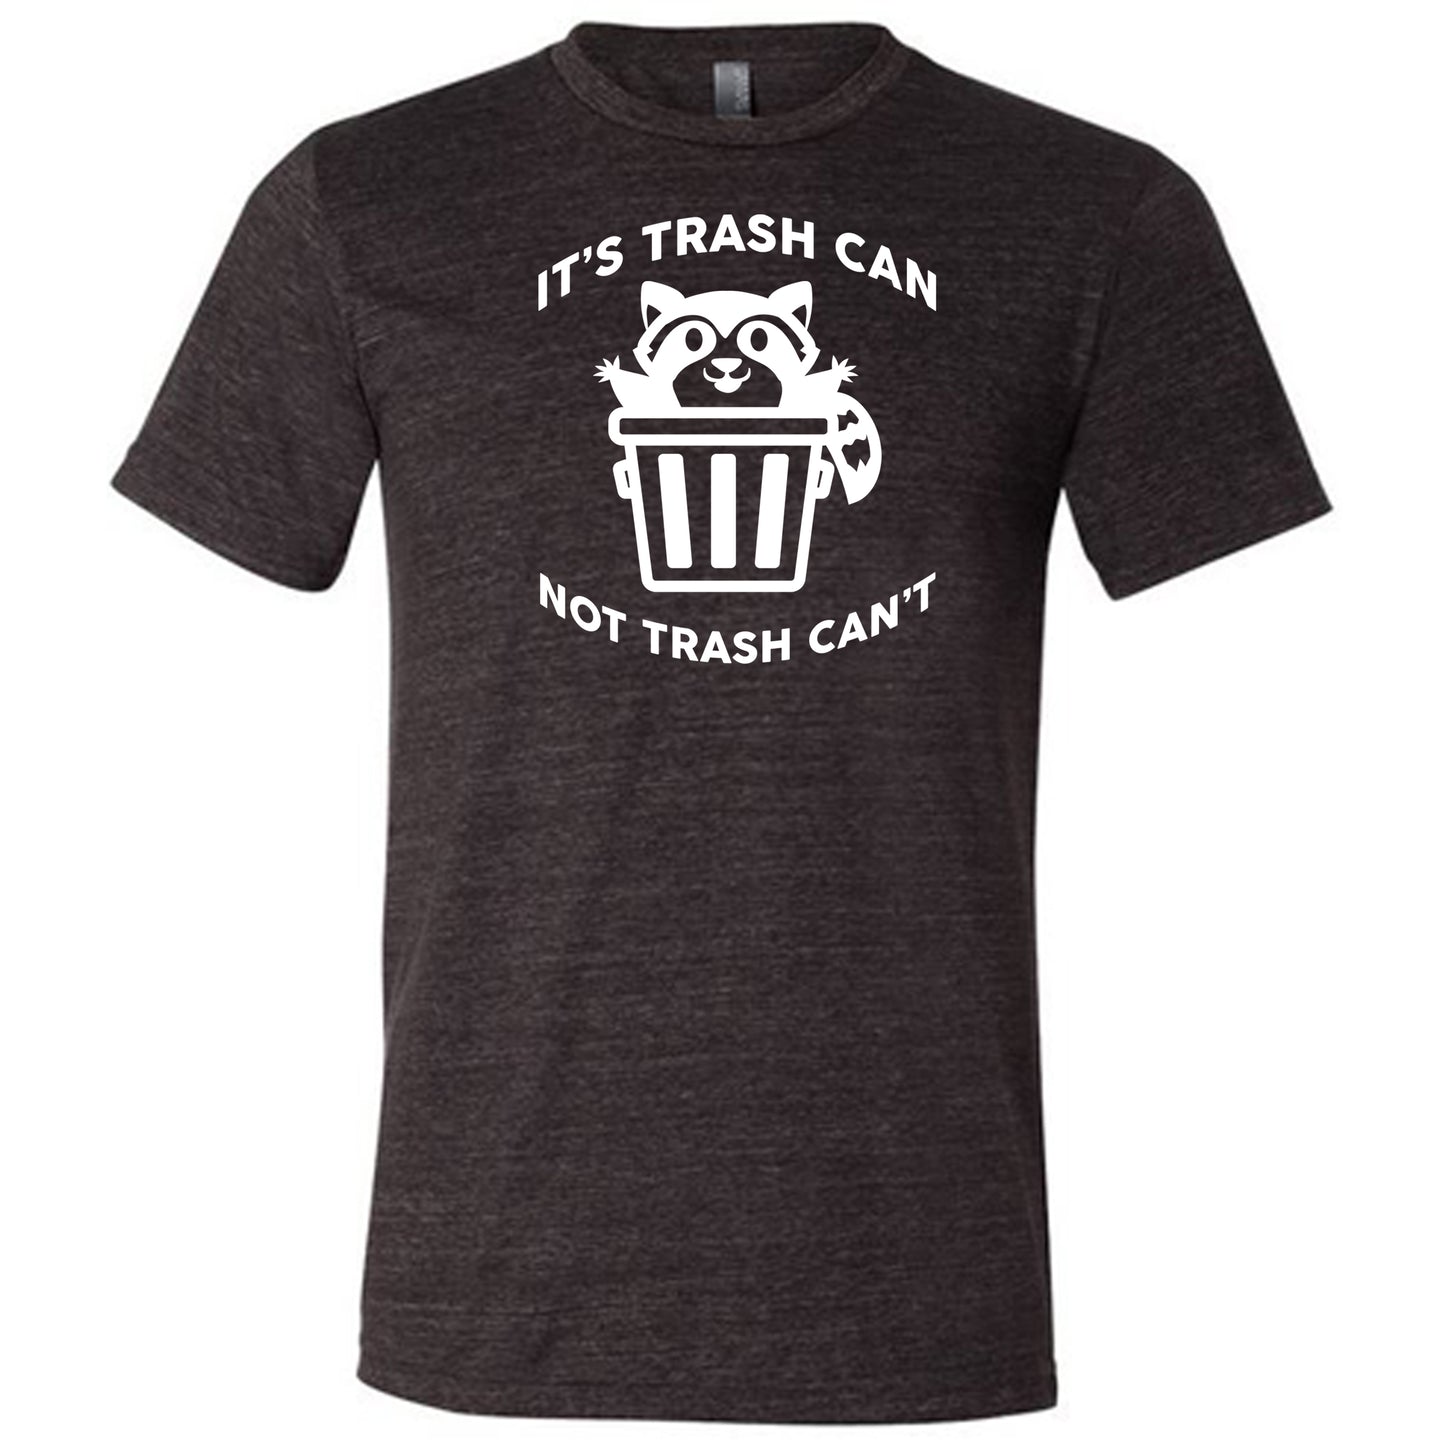 It's Trash Can Not Trash Can't Shirt Unisex